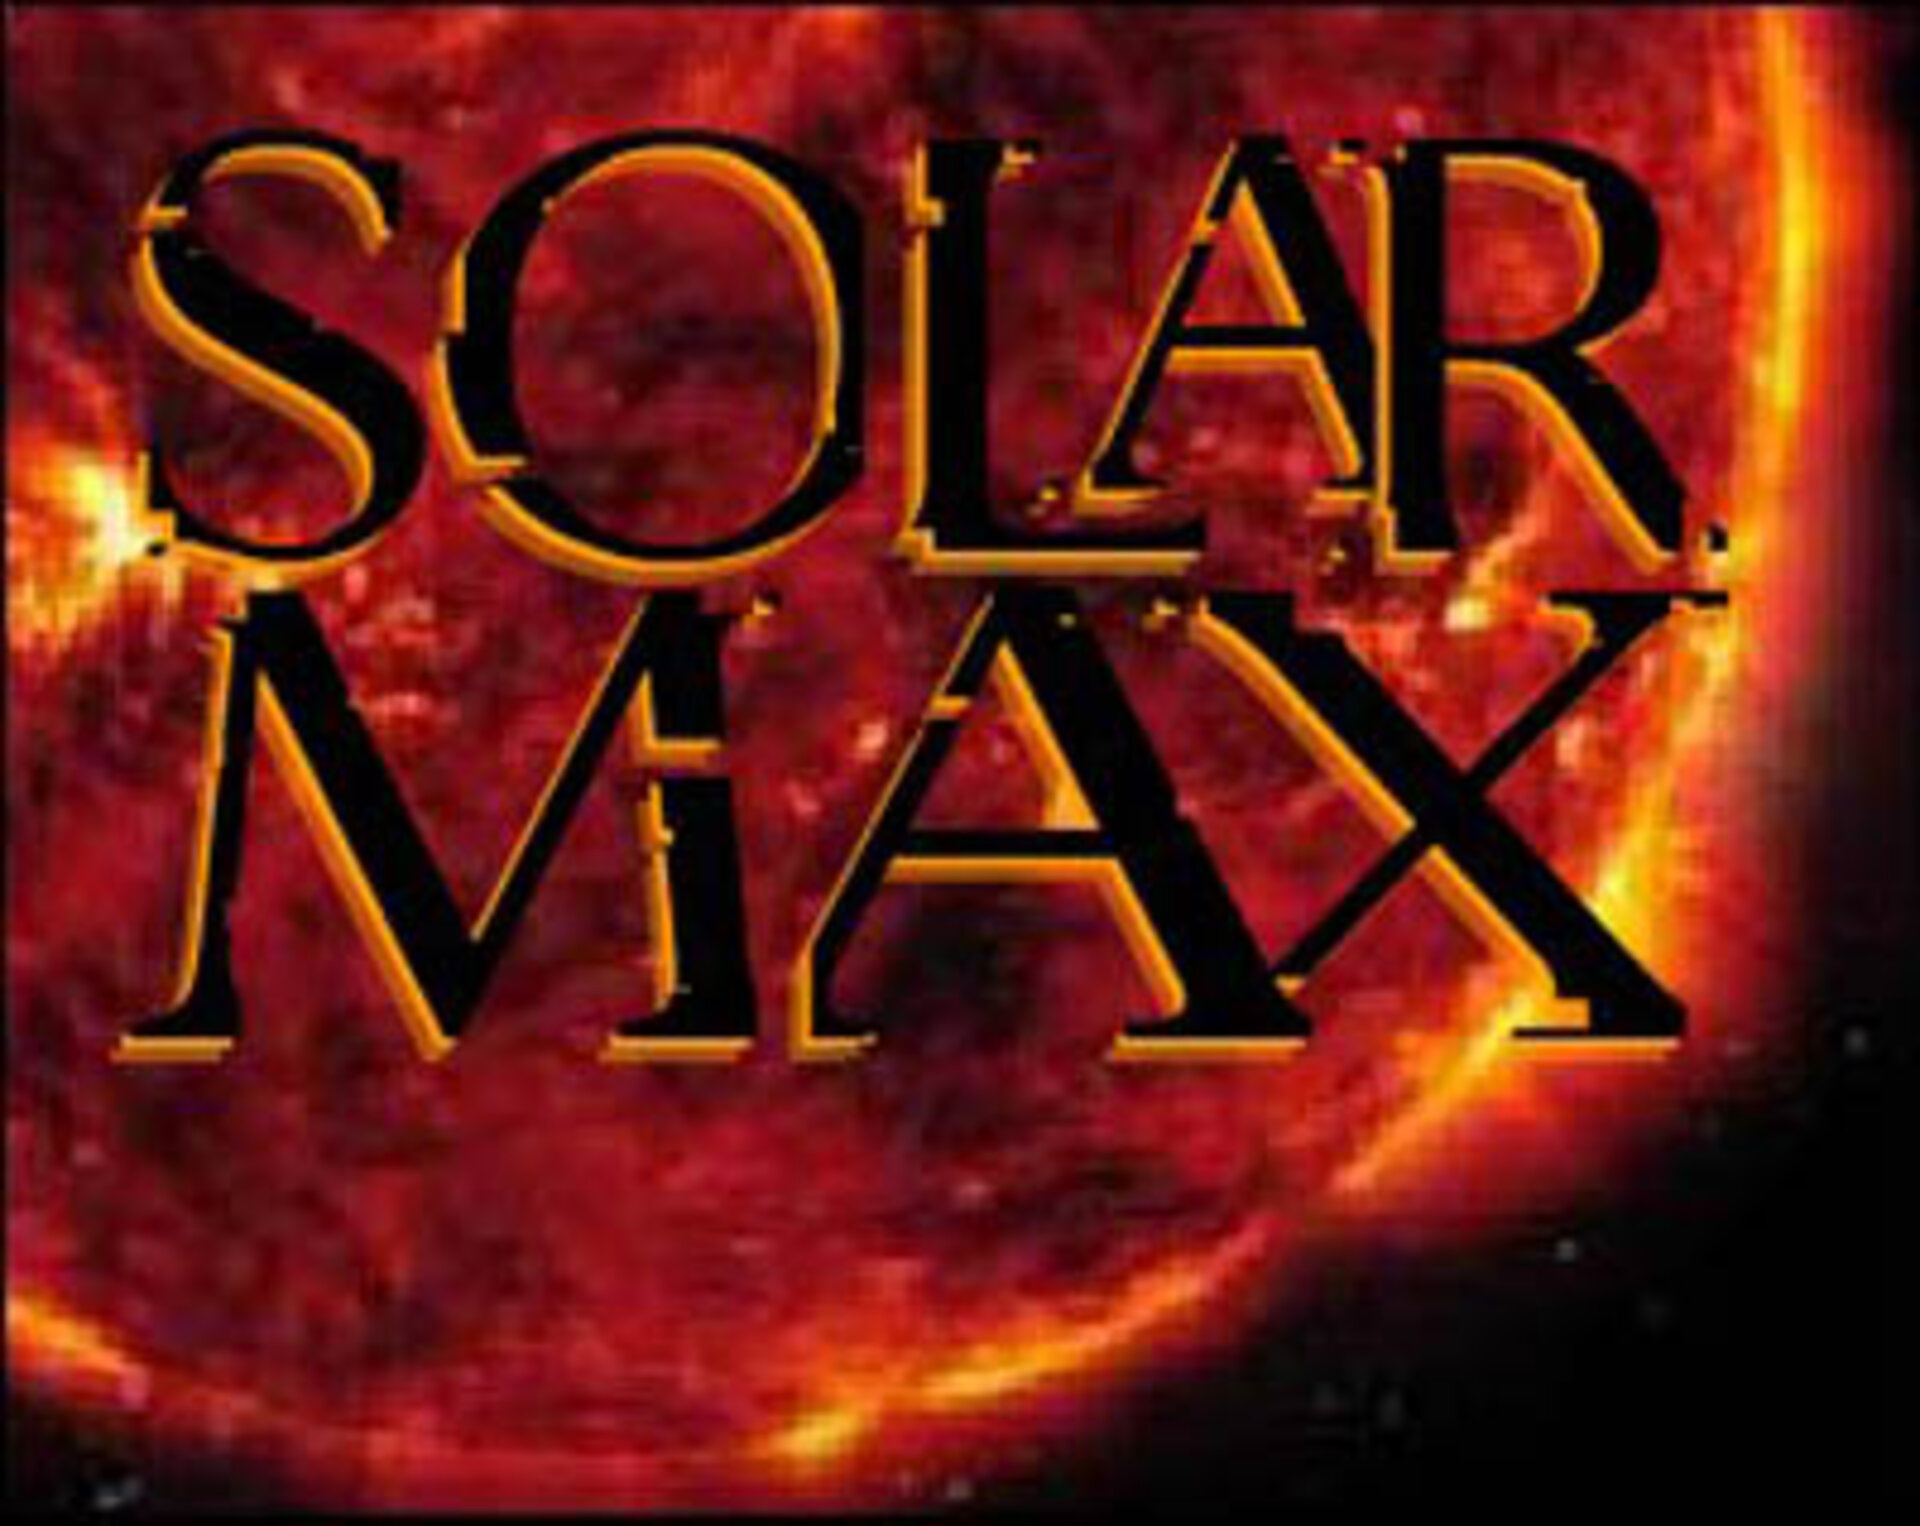 SOLARMAX  - the prize for the SOHO-500 comet competition